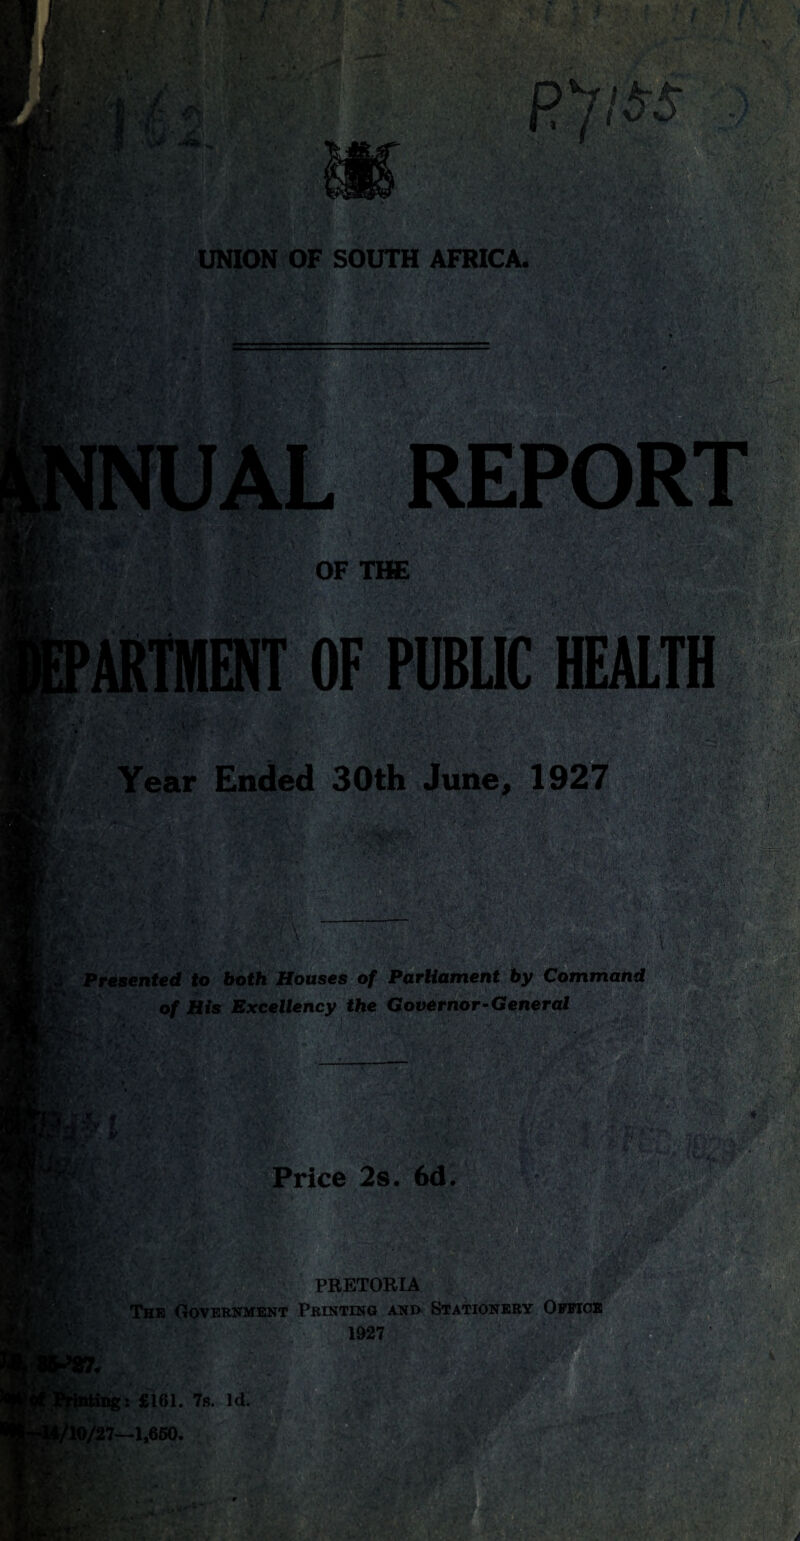 '■ ■ ■ »r* . 1 \;r r PARTMENT OF PUBLIC HEALTH t'J'rV/- VI Year Ended 30th June, 1927 f® fli-5 ■ ••••;; • ■' •1 'Mj' i- v !•/},•' A ,i f. f*%Nk a 1 < * •,• frye*- ■ ••*Trr/1. . j . t M. Presented to both Houses of Parliament by Command of His Excellency the Governor-General S': ' f: ■m Price 2s. 6d. 3s D/27- £161. 7s. Id. 1,660. % **• PRETORIA The Government Printing anjx Stationery Office 1927